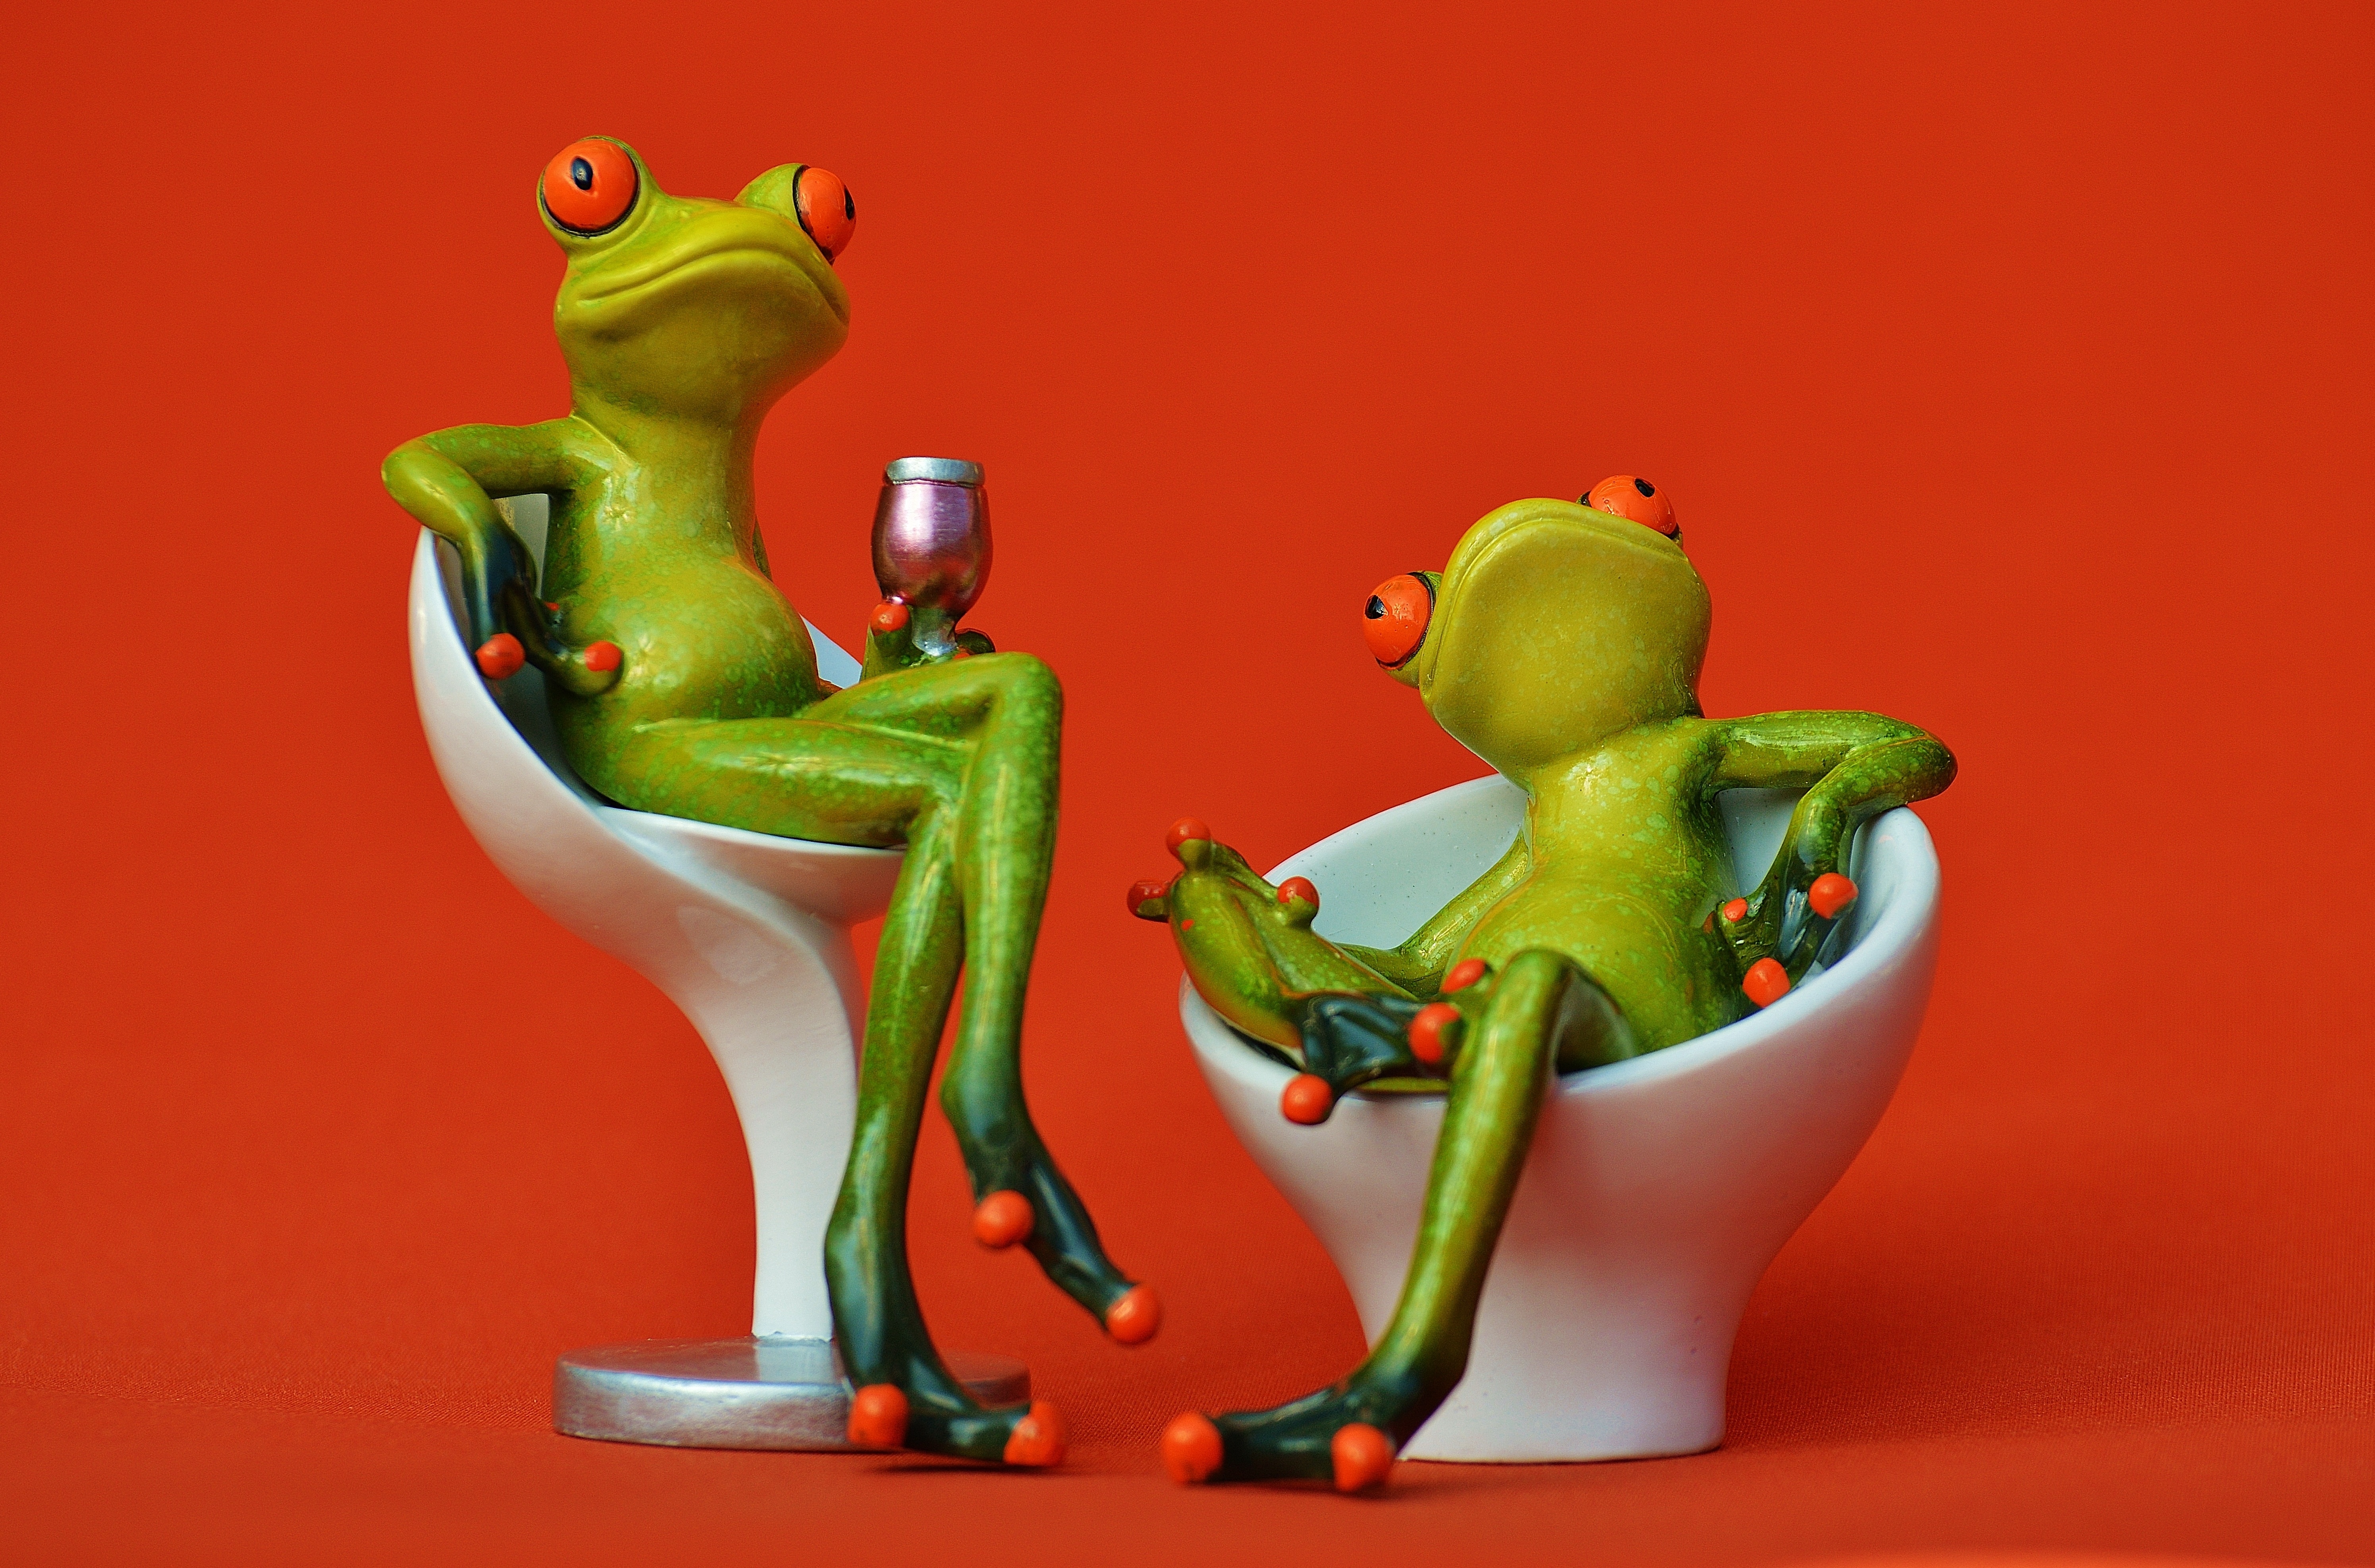 Party, Celebrate, Drink, Funny, Frogs, colored background, studio shot